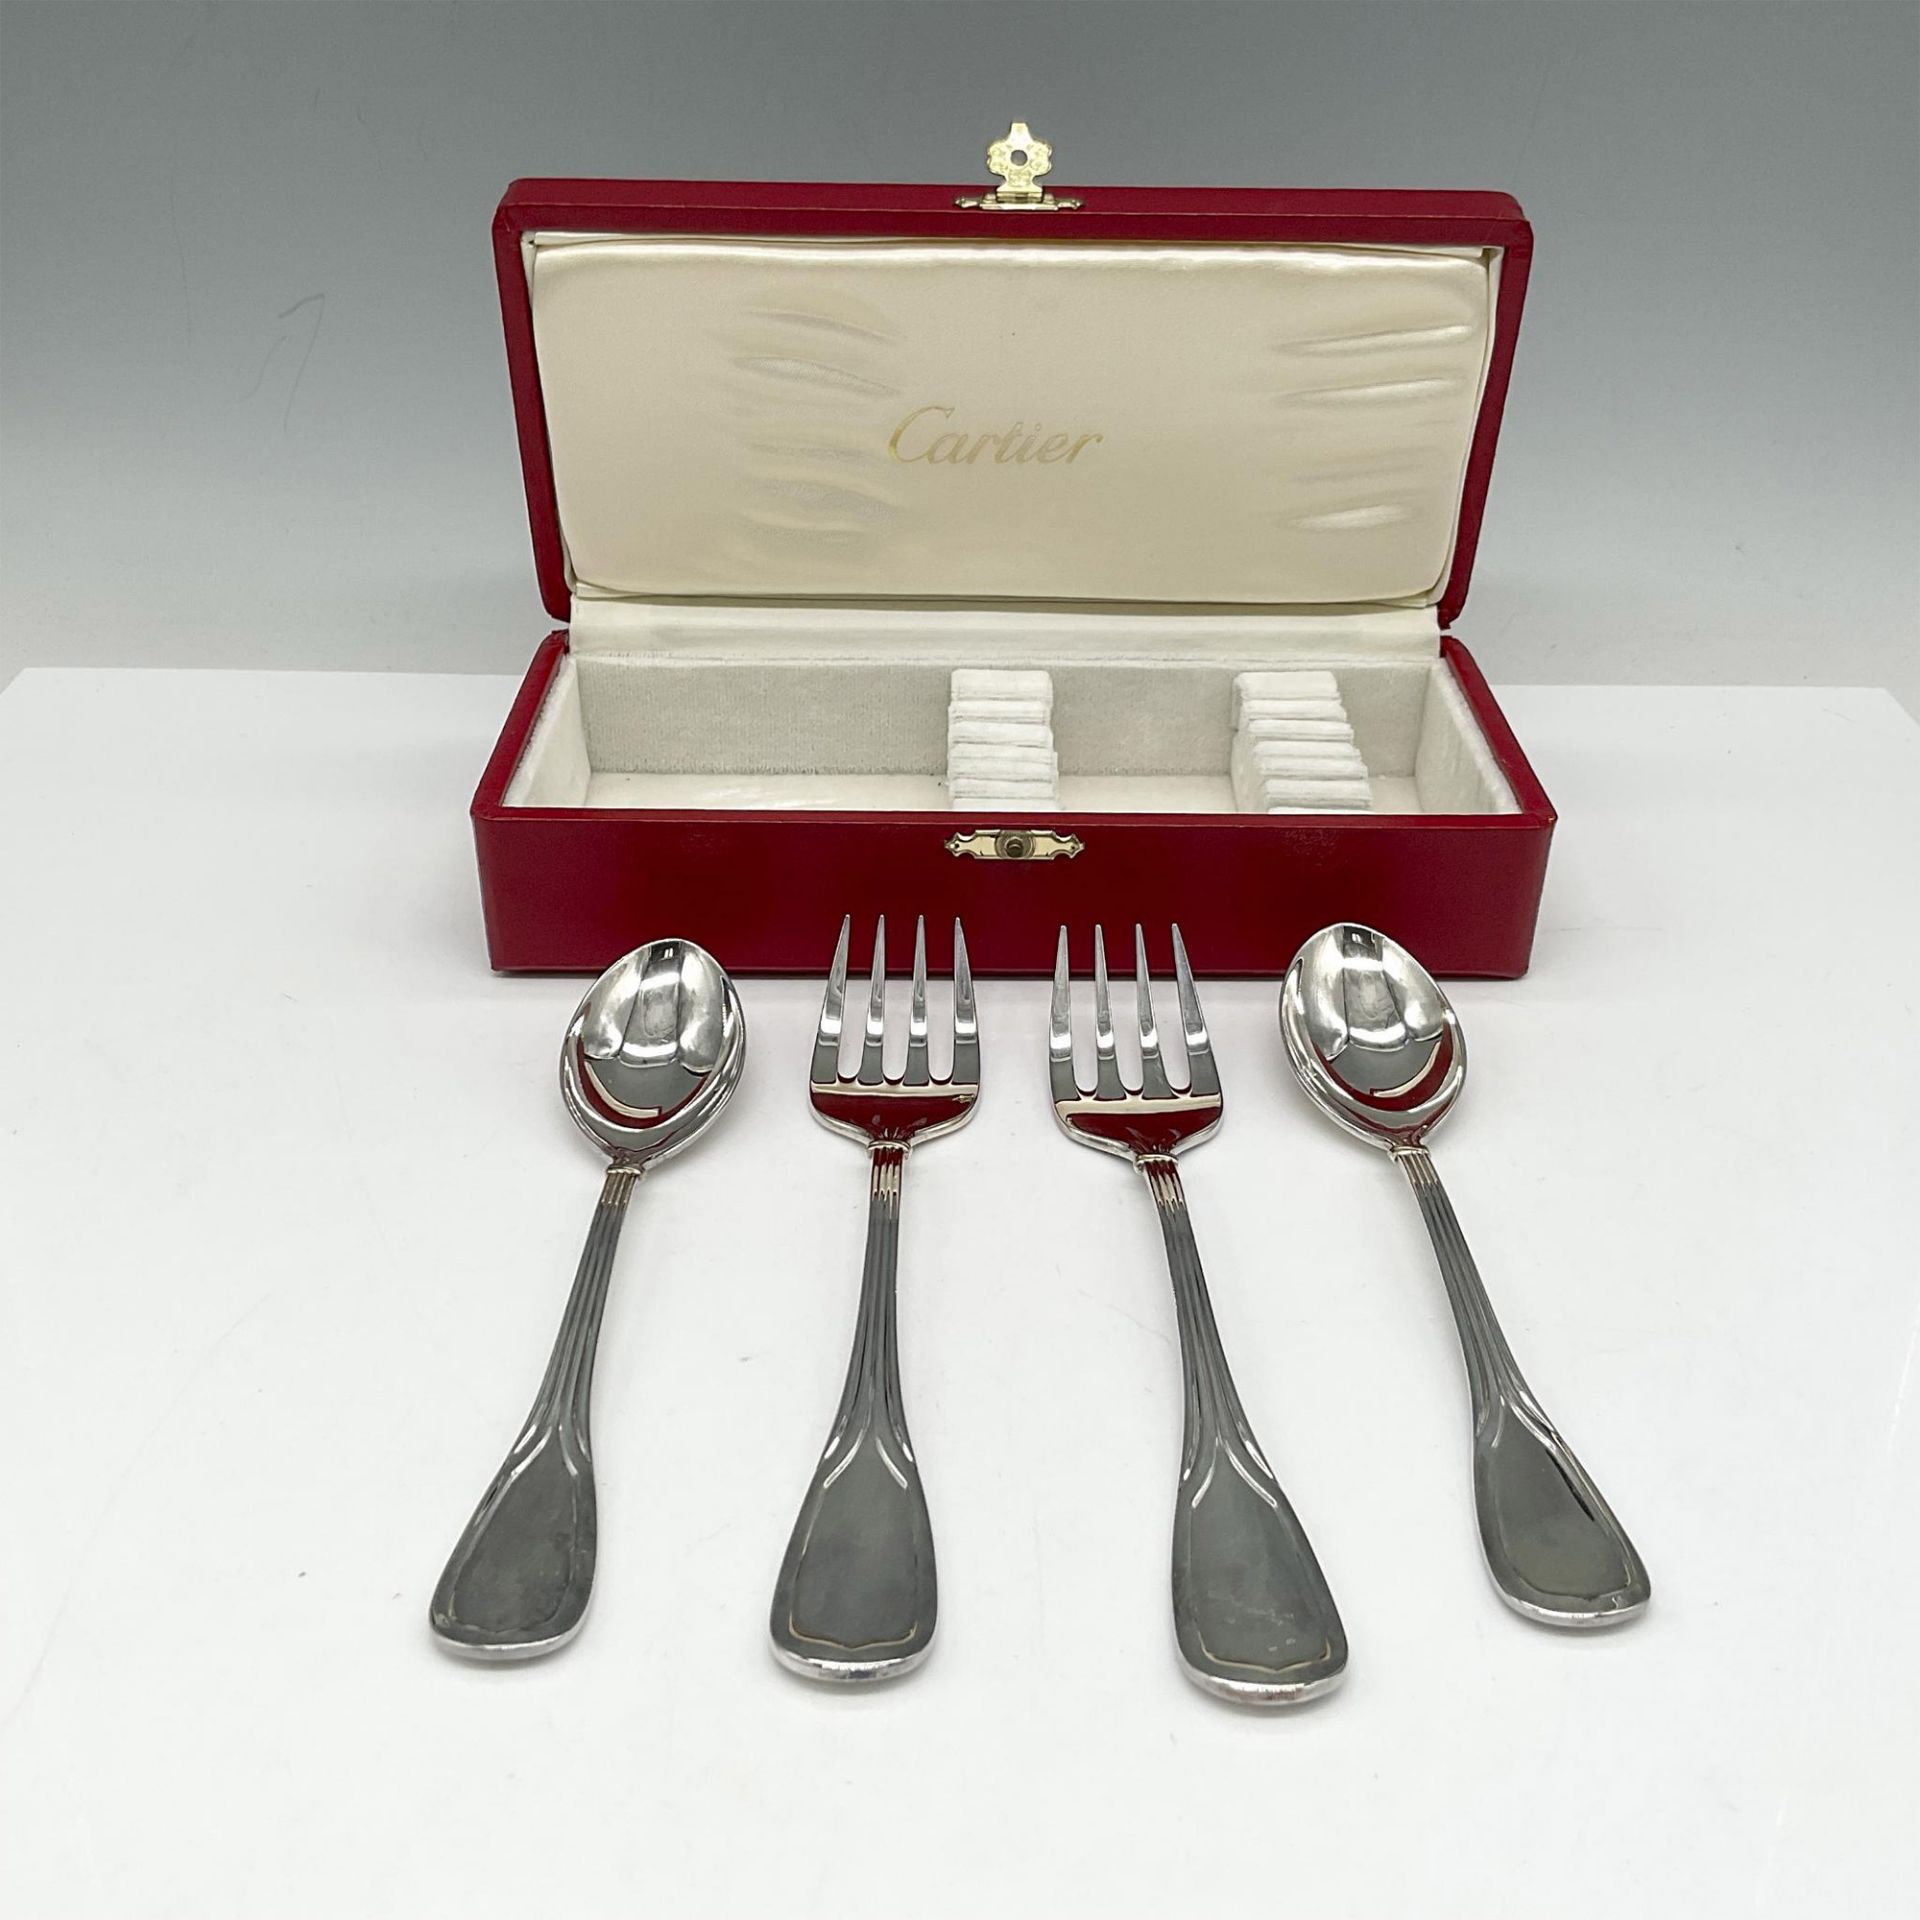 Cartier Sterling Silver Spoon and Fork Set, 4 pieces - Bild 2 aus 3